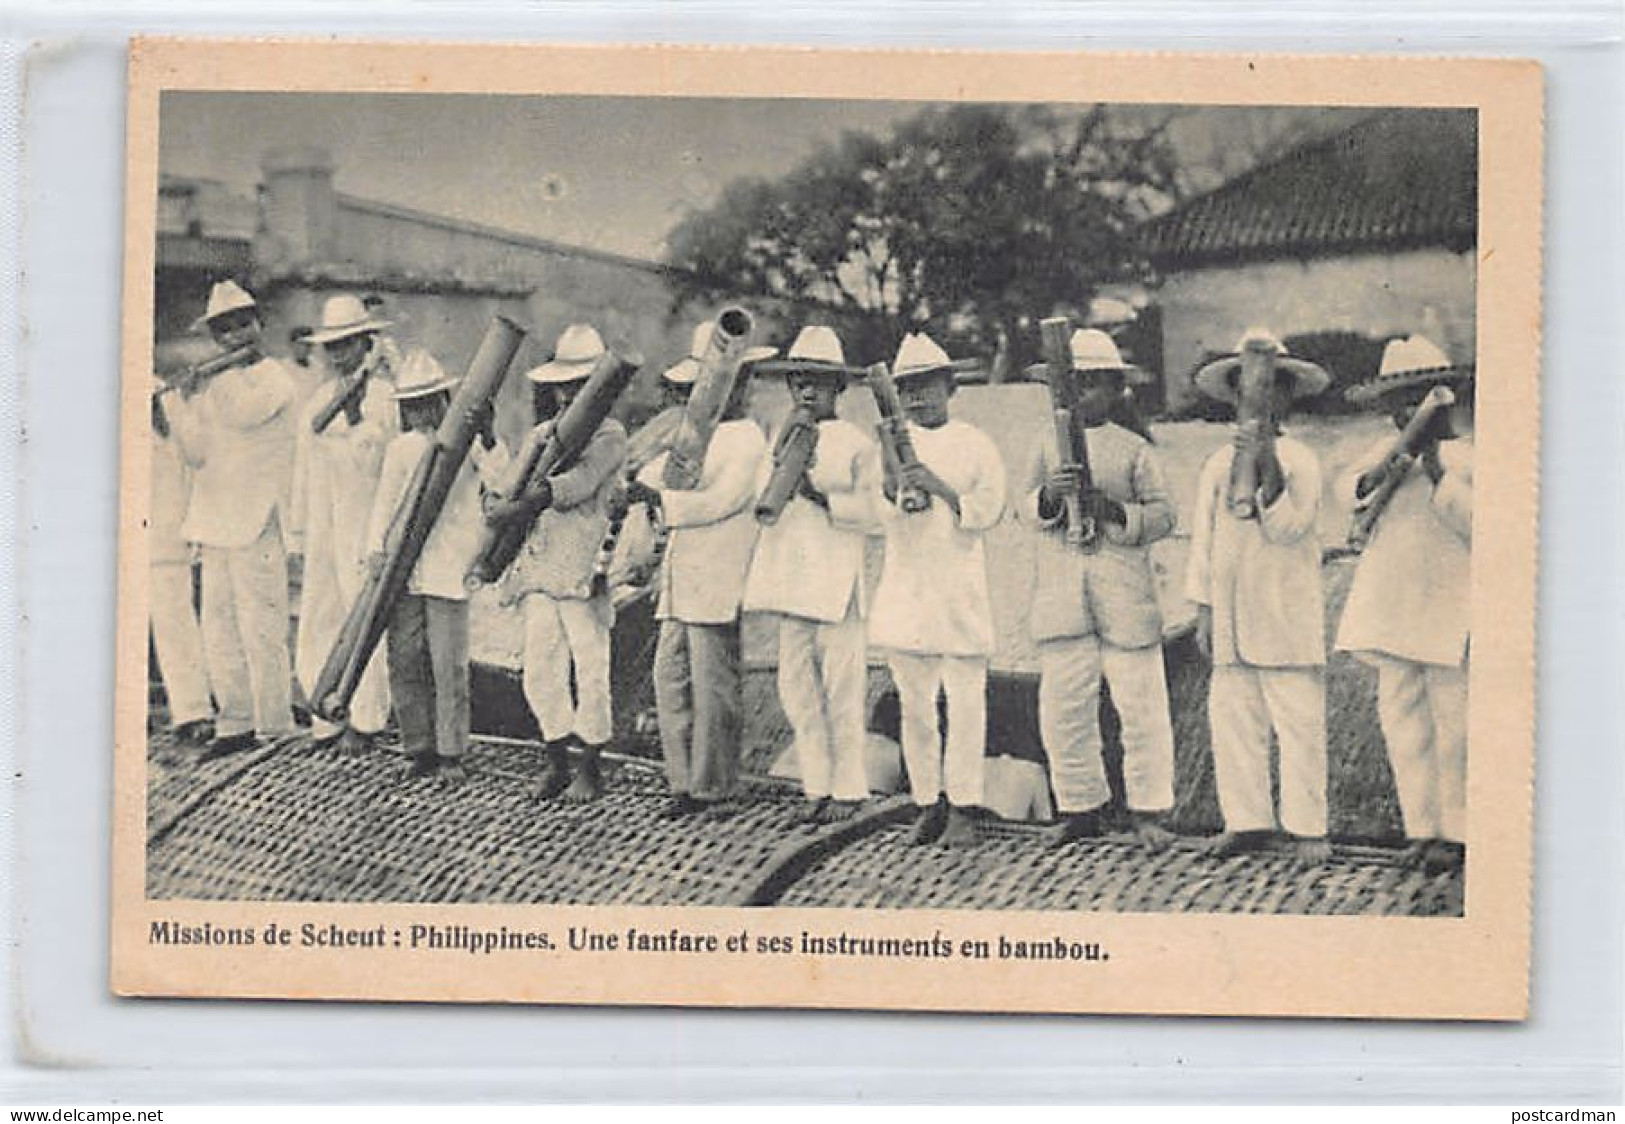 Philippines - A Marching Band And Its Bamboo Instruments - Publ. Missiën Van Scheut - Scheut Missions  - Filipinas